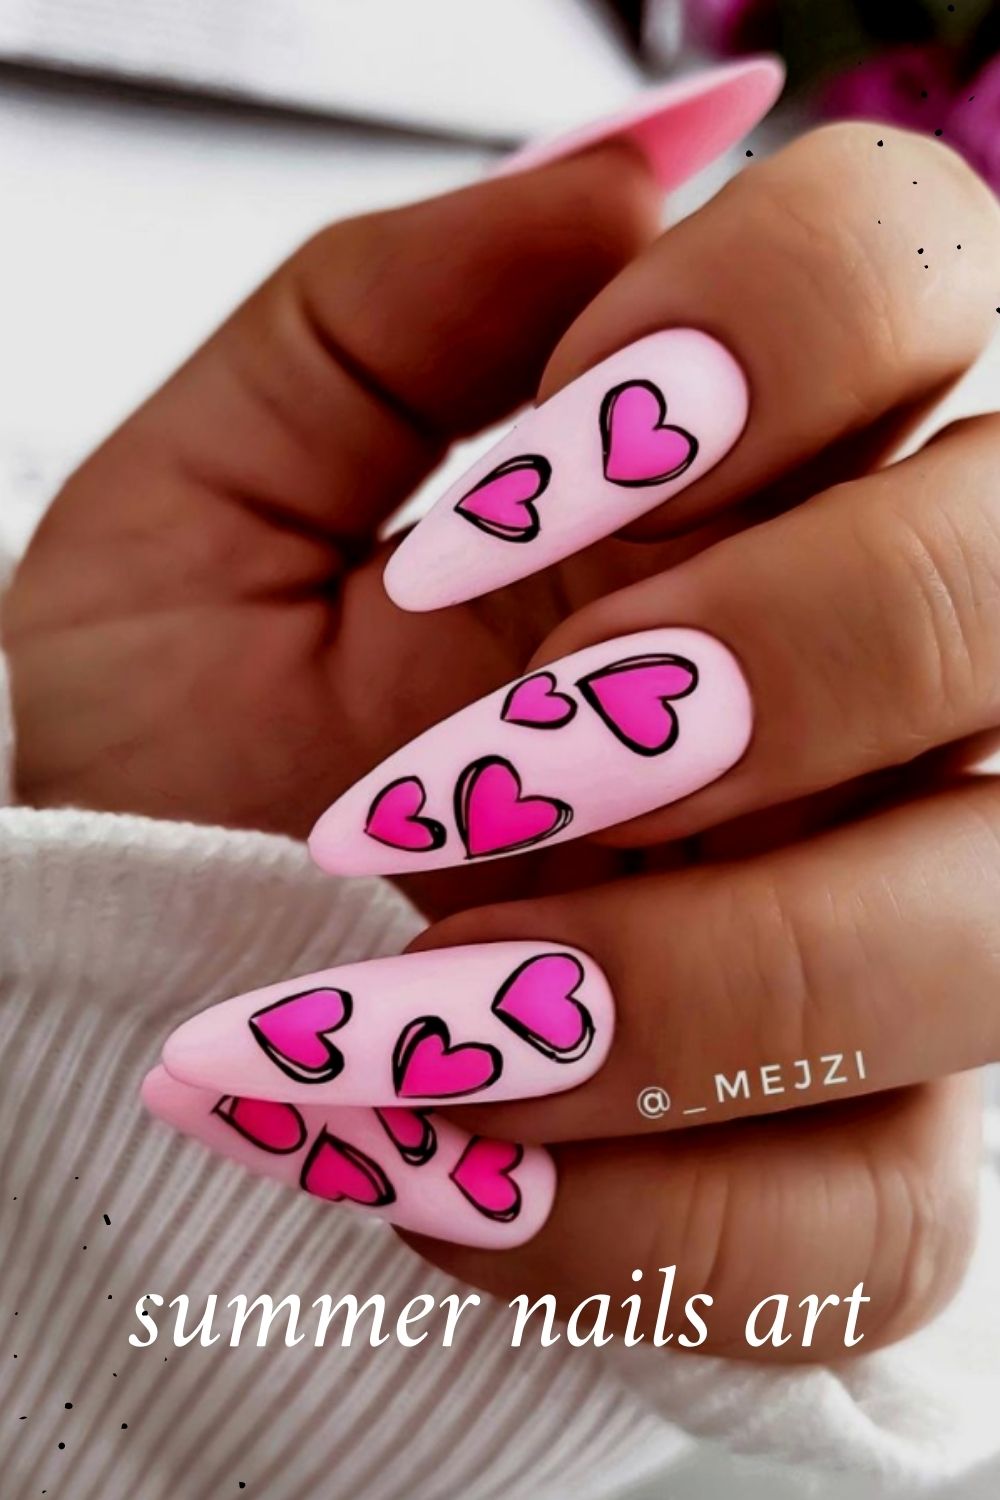 Almond nails designs with pink heart